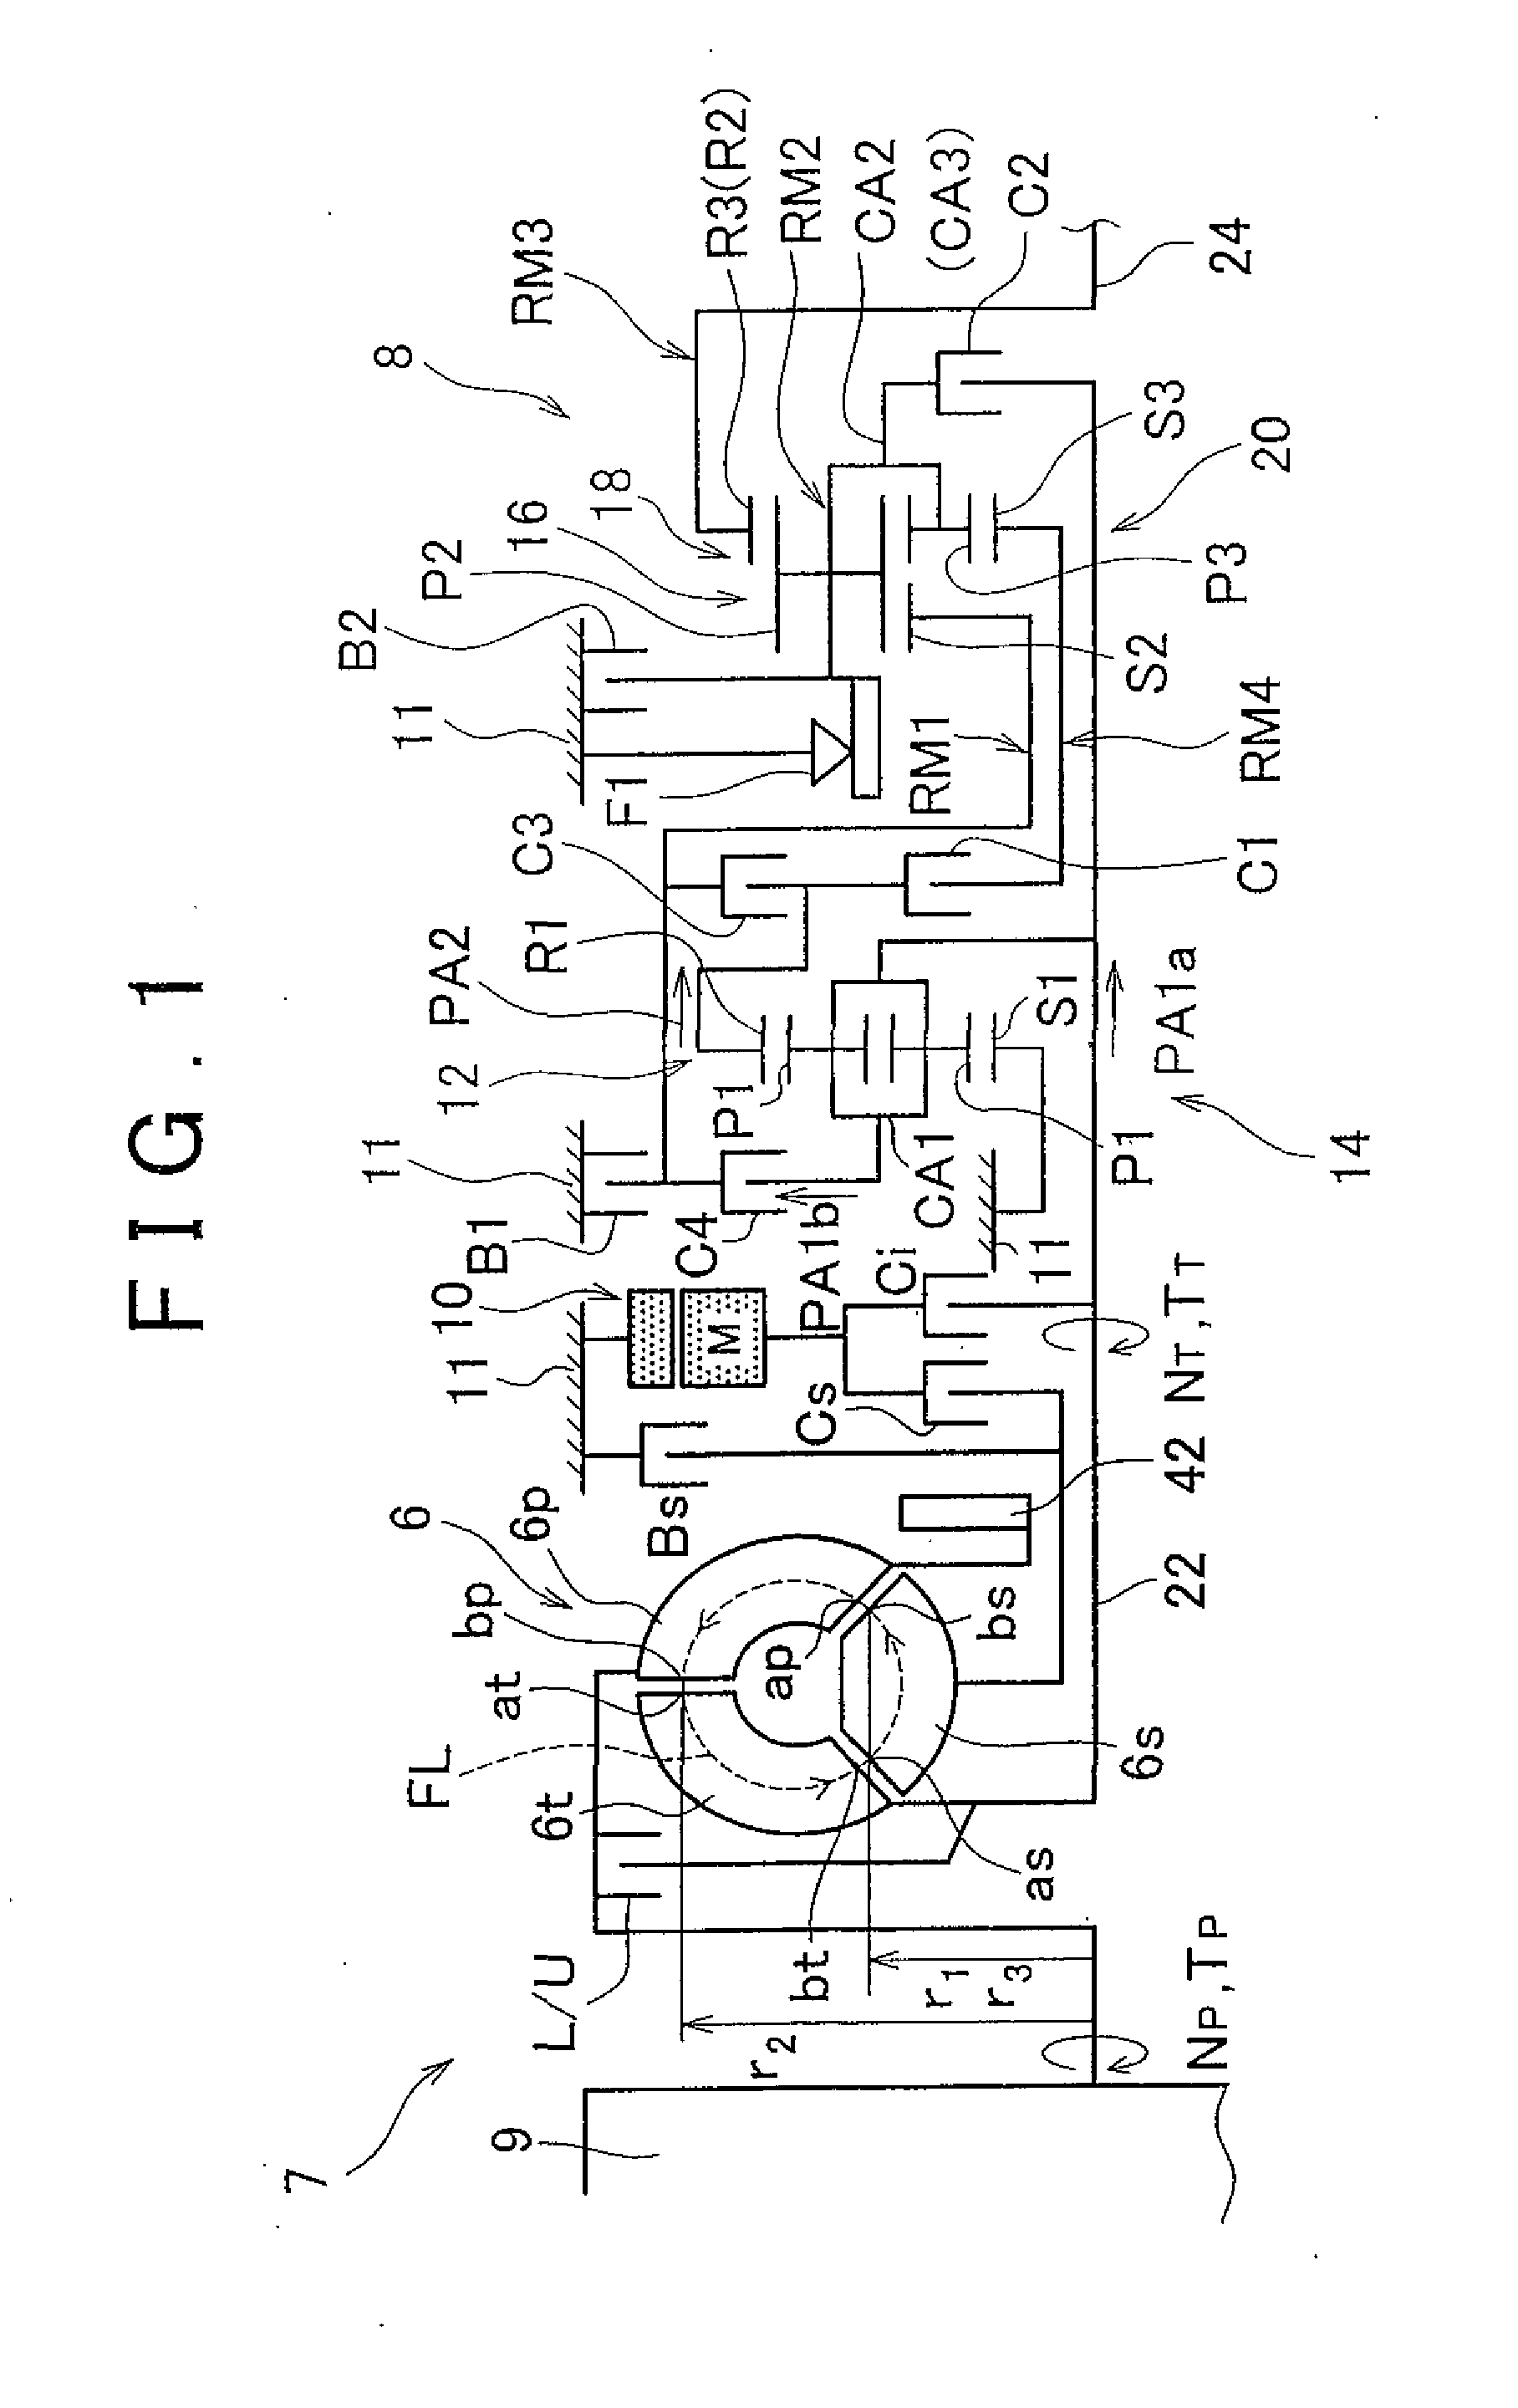 Control device for vehicular power transmitting system and corresponding method